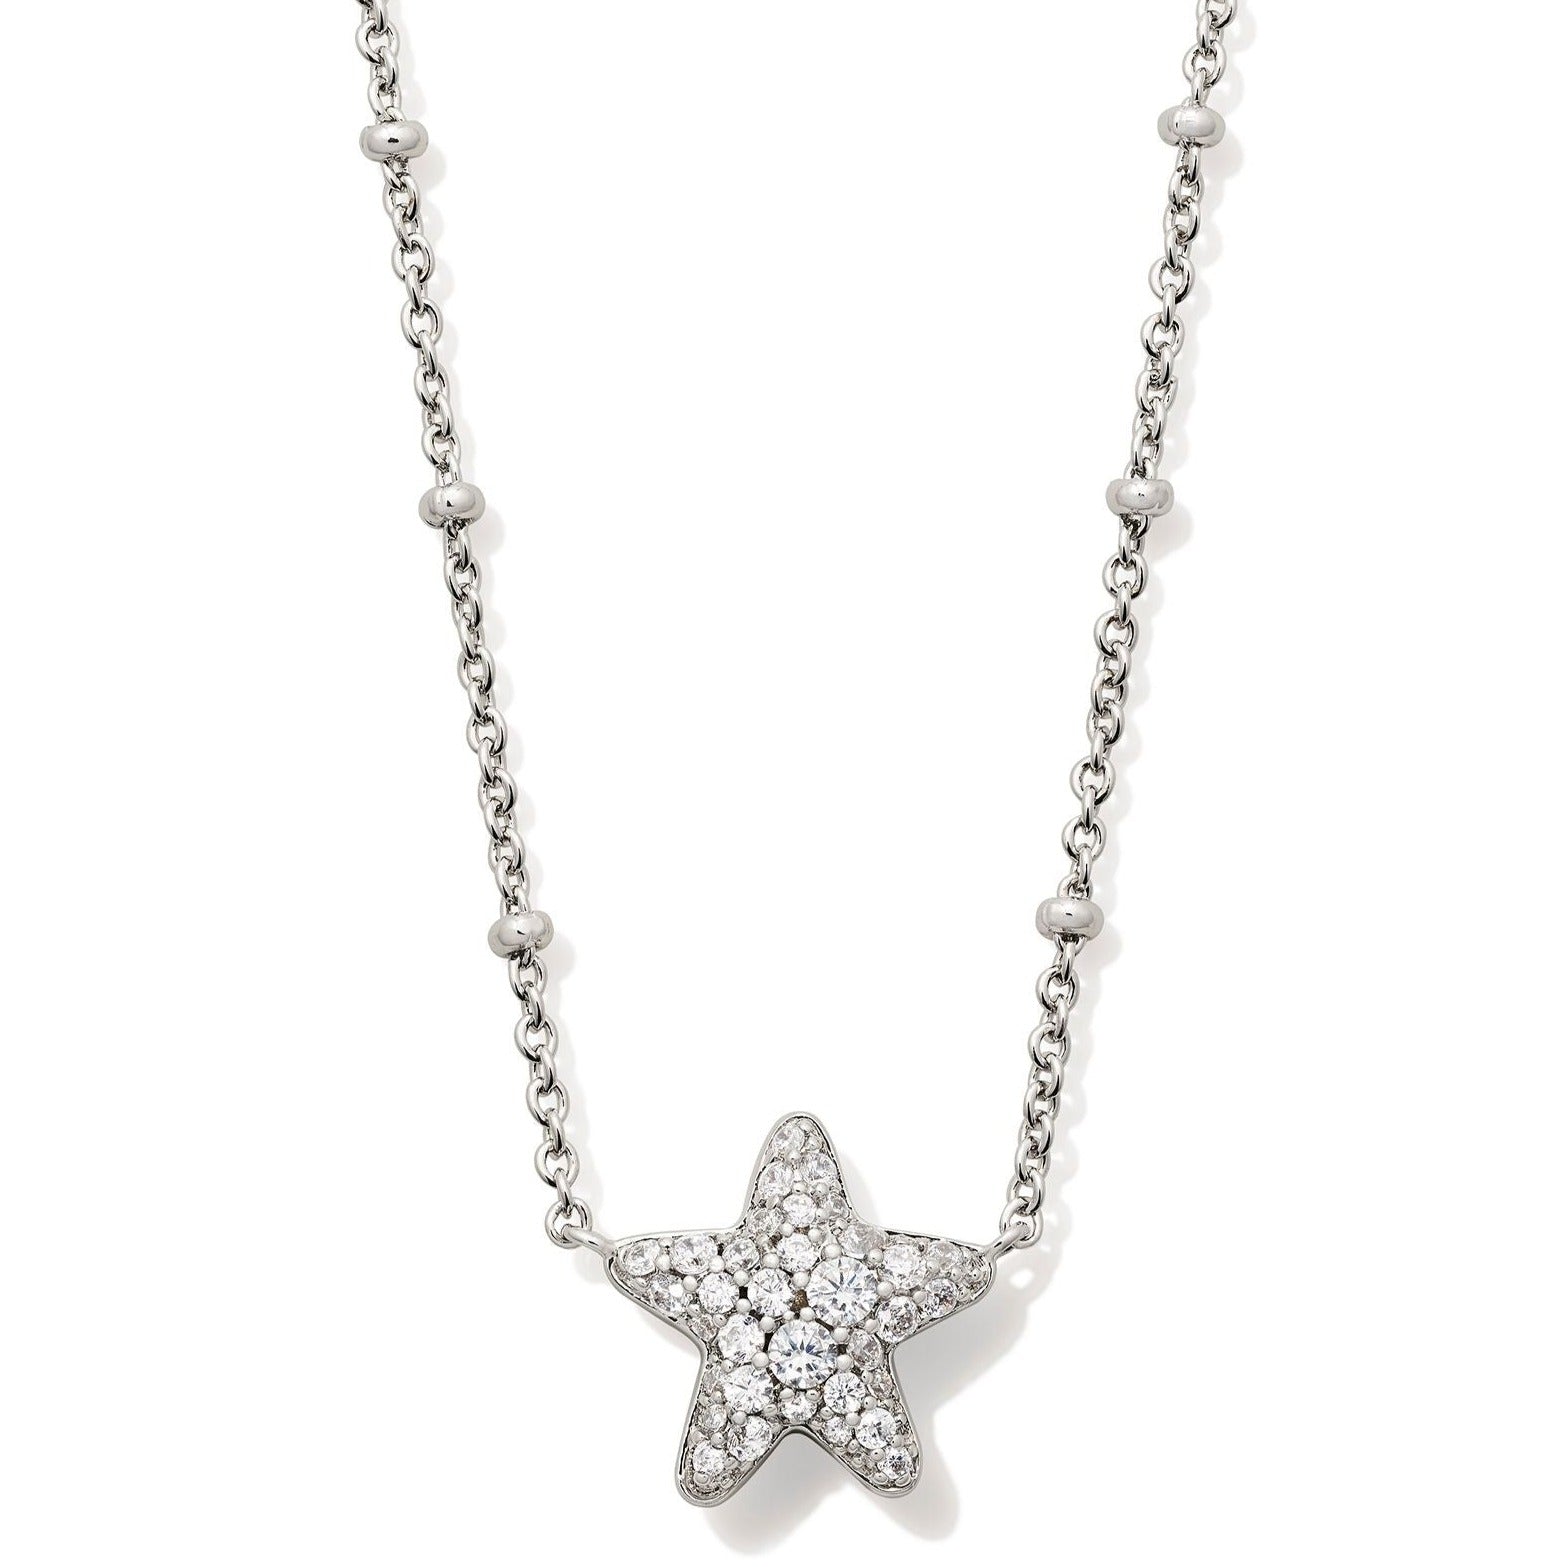 Kendra Scott | Jae Silver Star Pave Pendant Necklace in White Crystal - Giddy Up Glamour Boutique